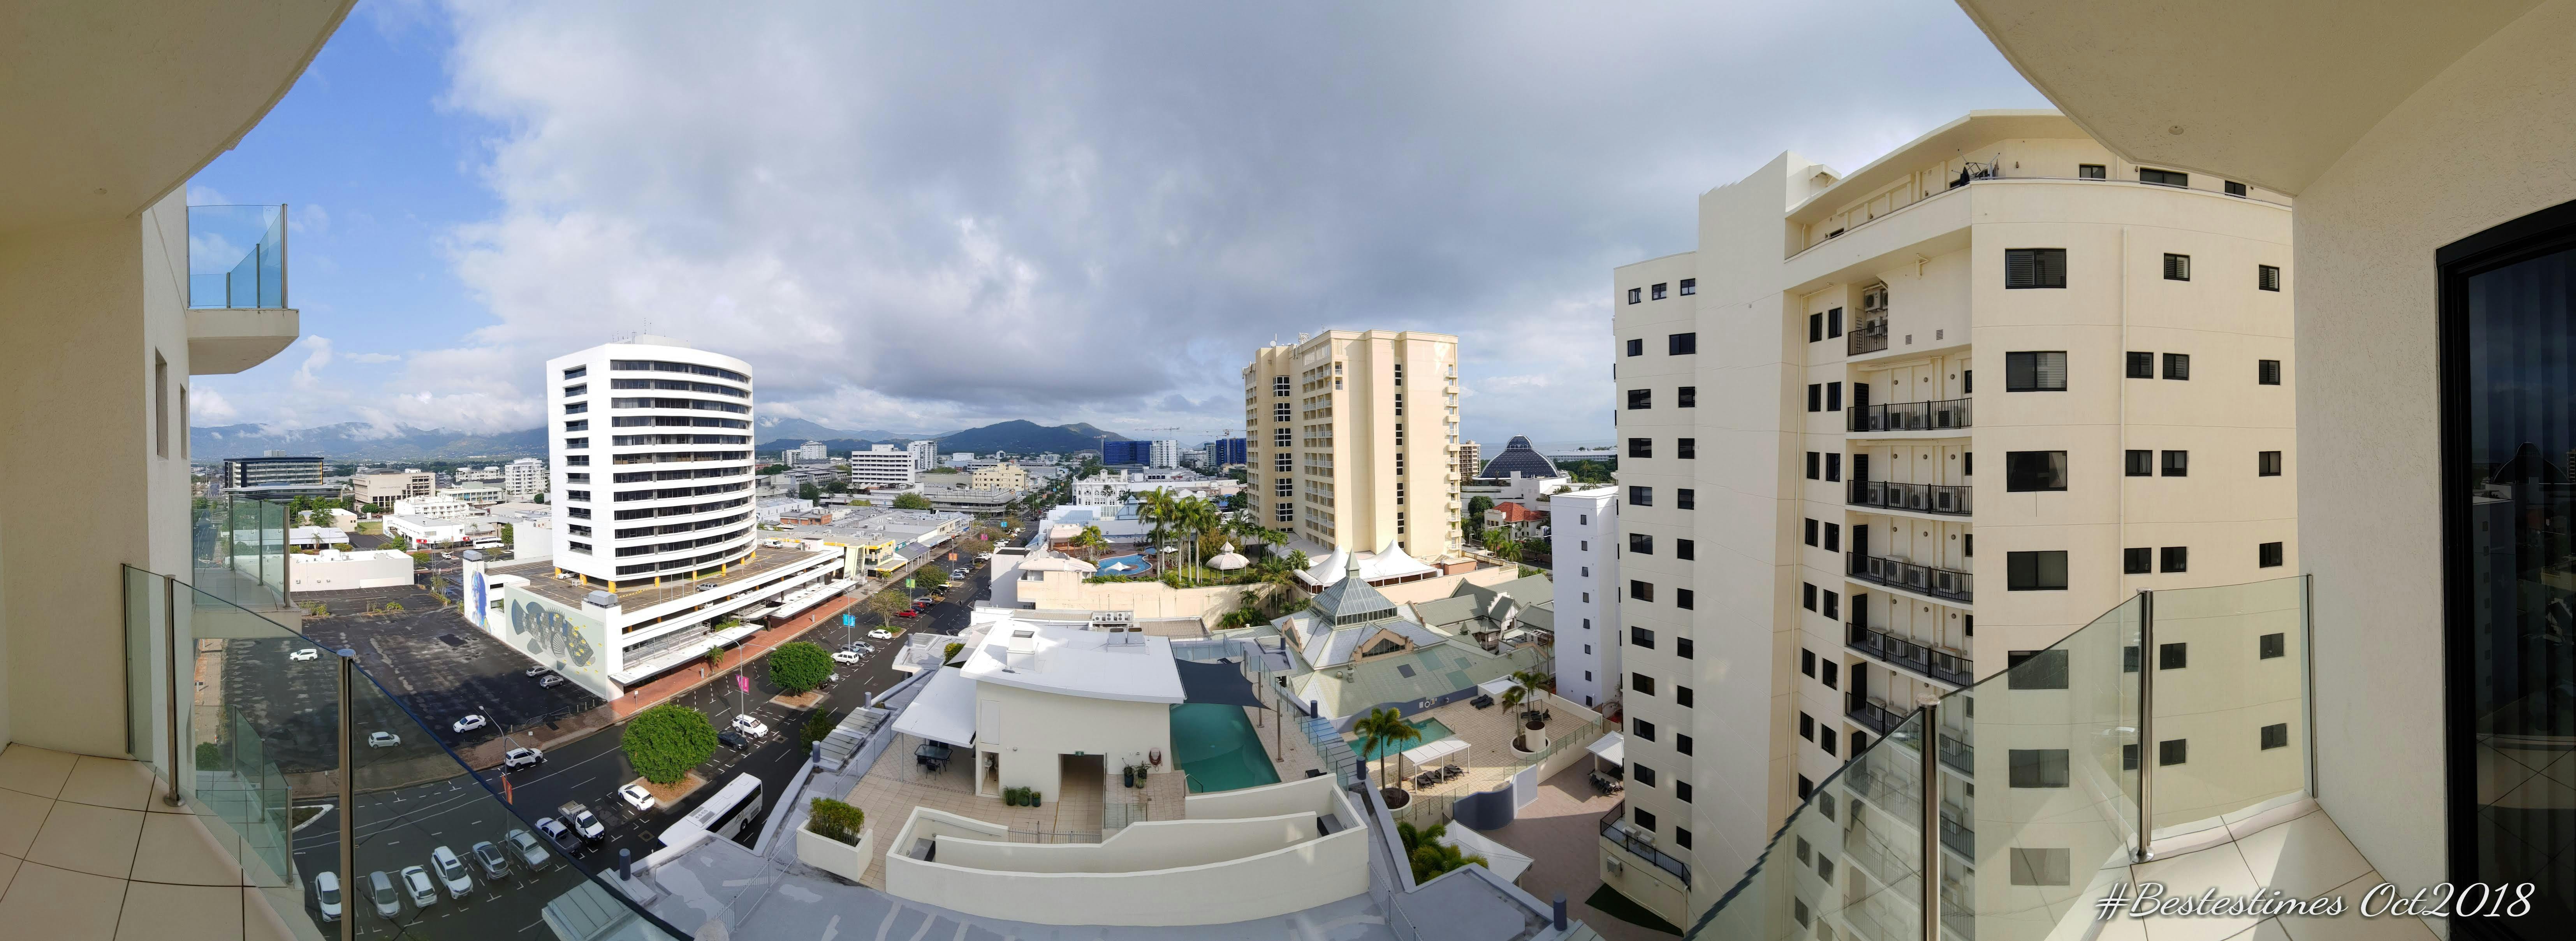 Free stock photo of bestestimes, cairns, city